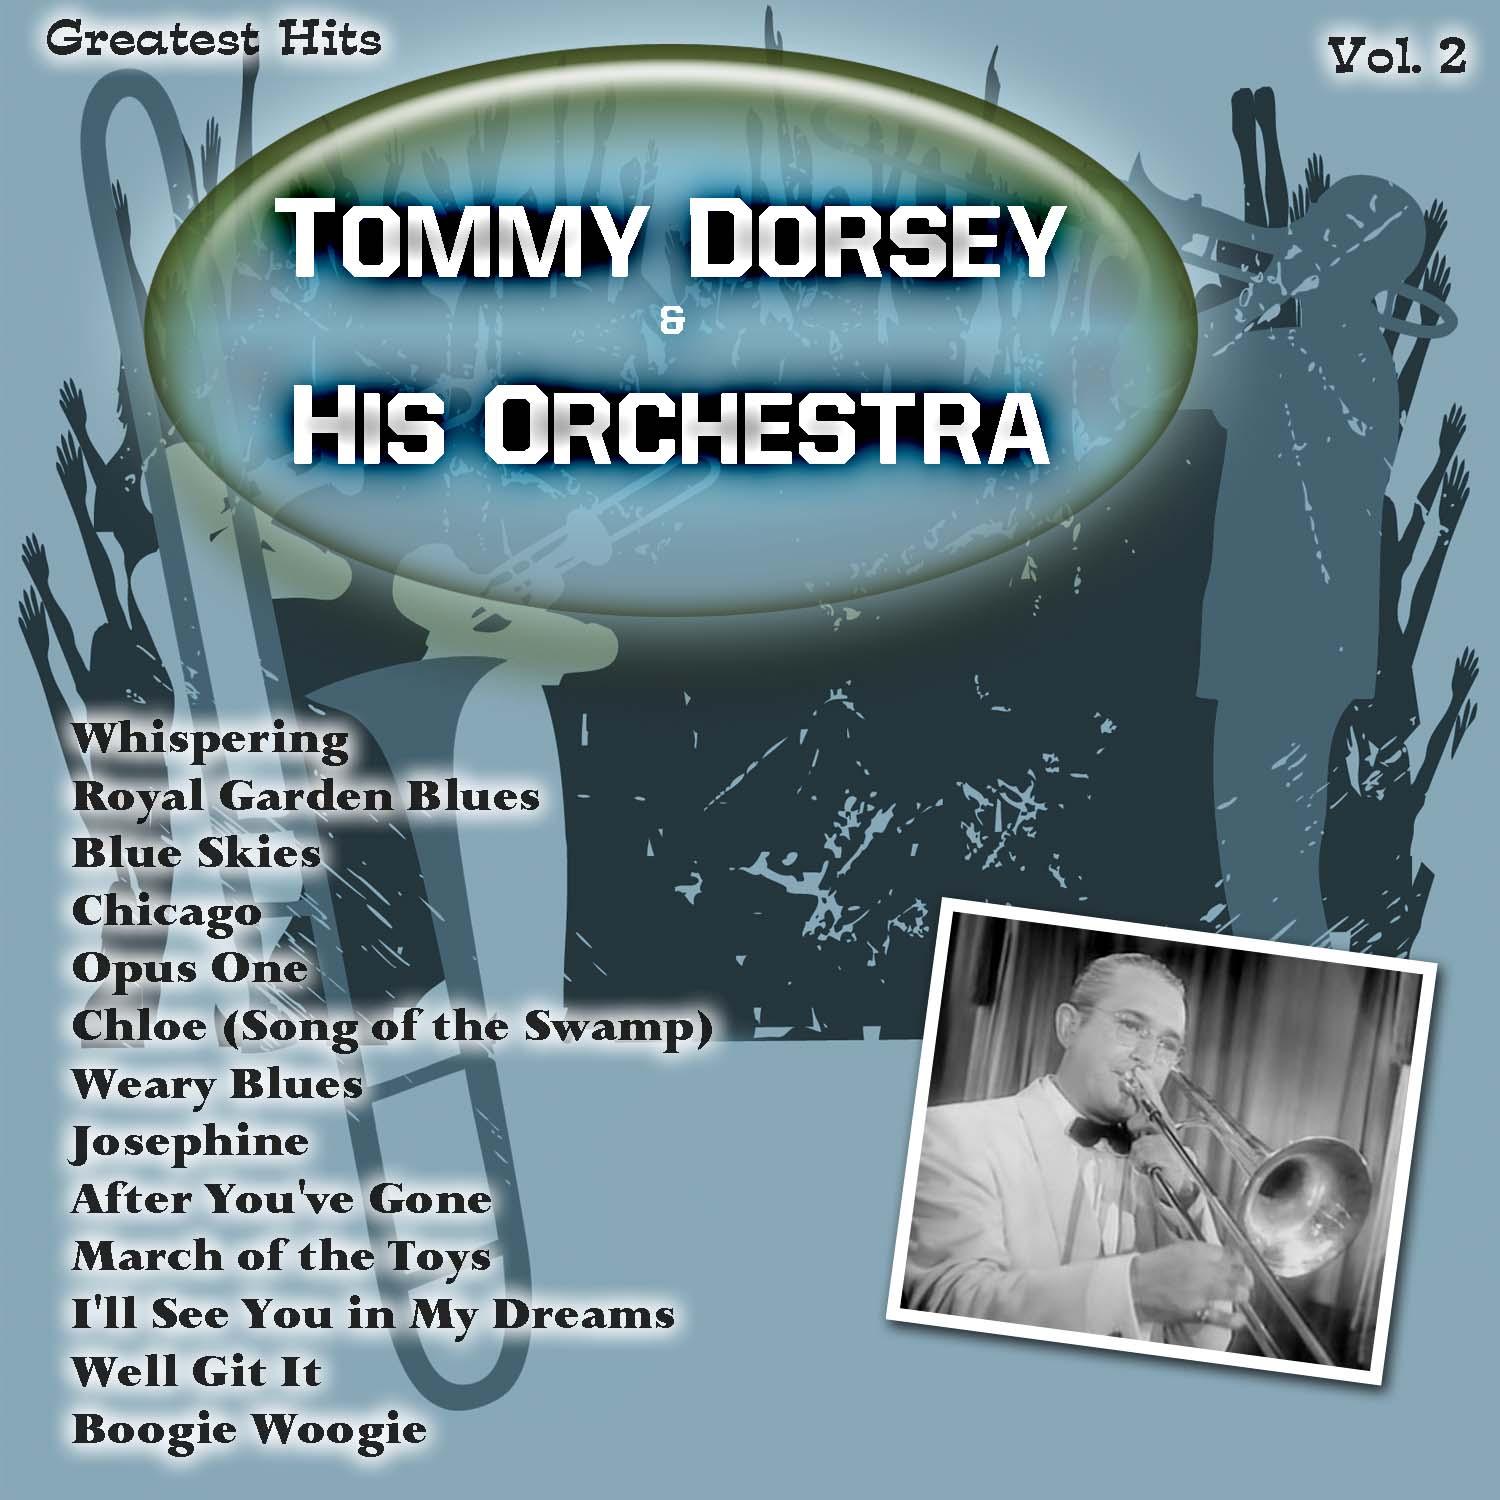 Greatest Hits: Tommy Dorsey & His Orchestra Vol. 2